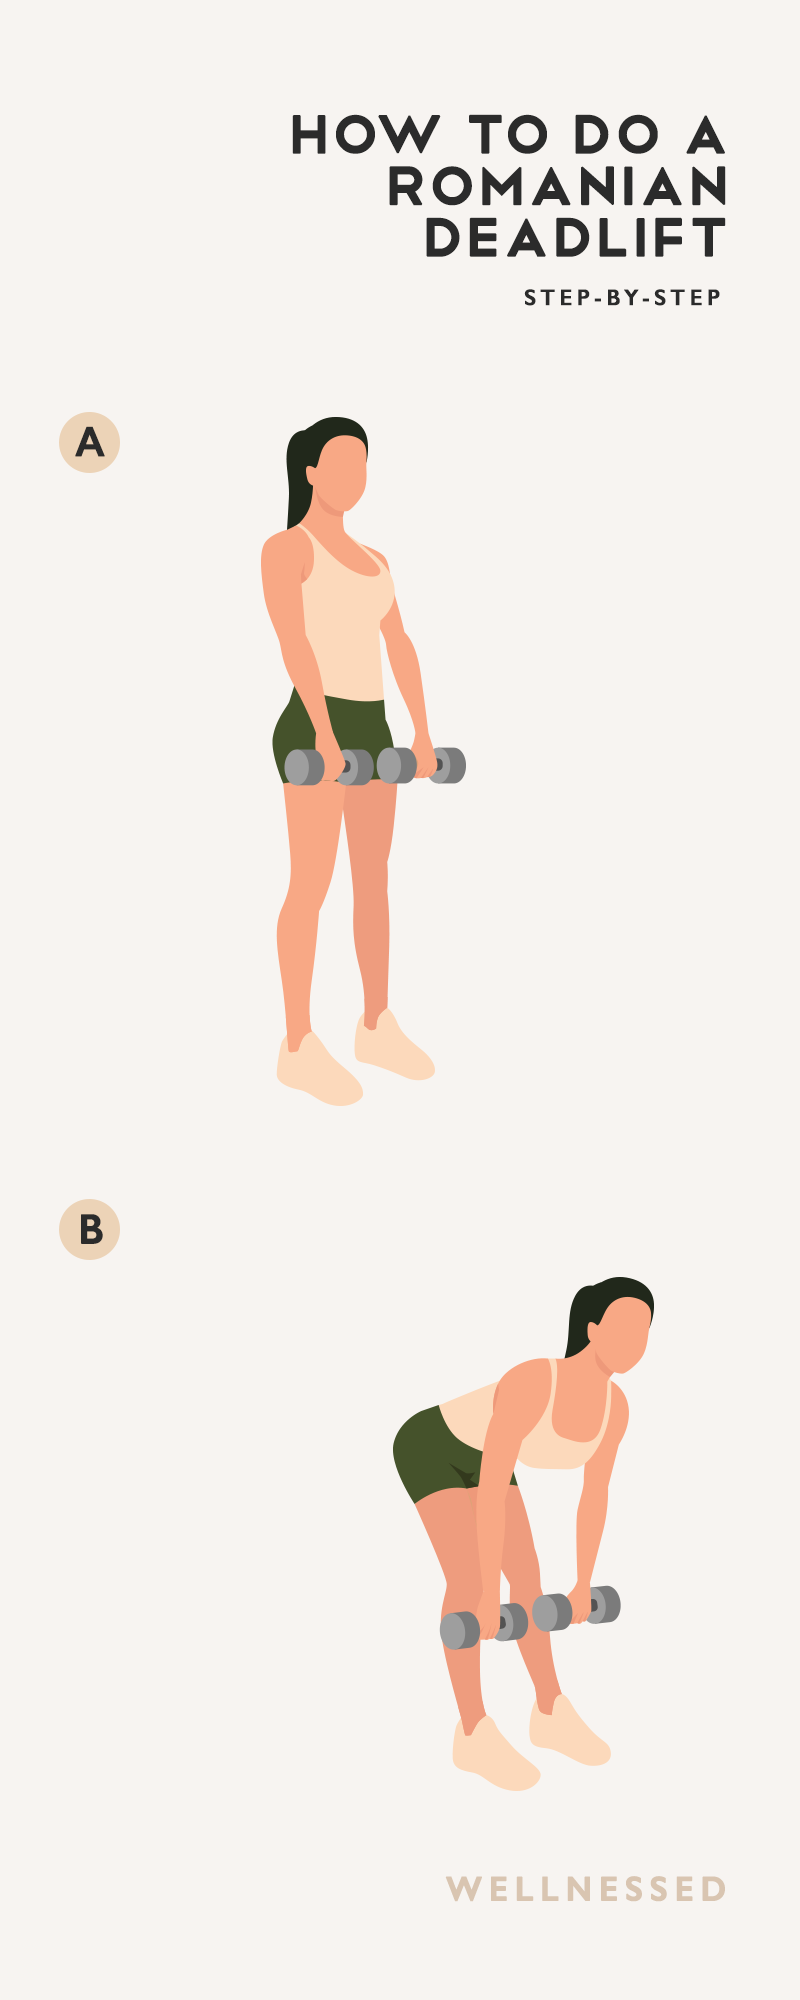 Step-by-step illustration of how to do a Romanian deadlift